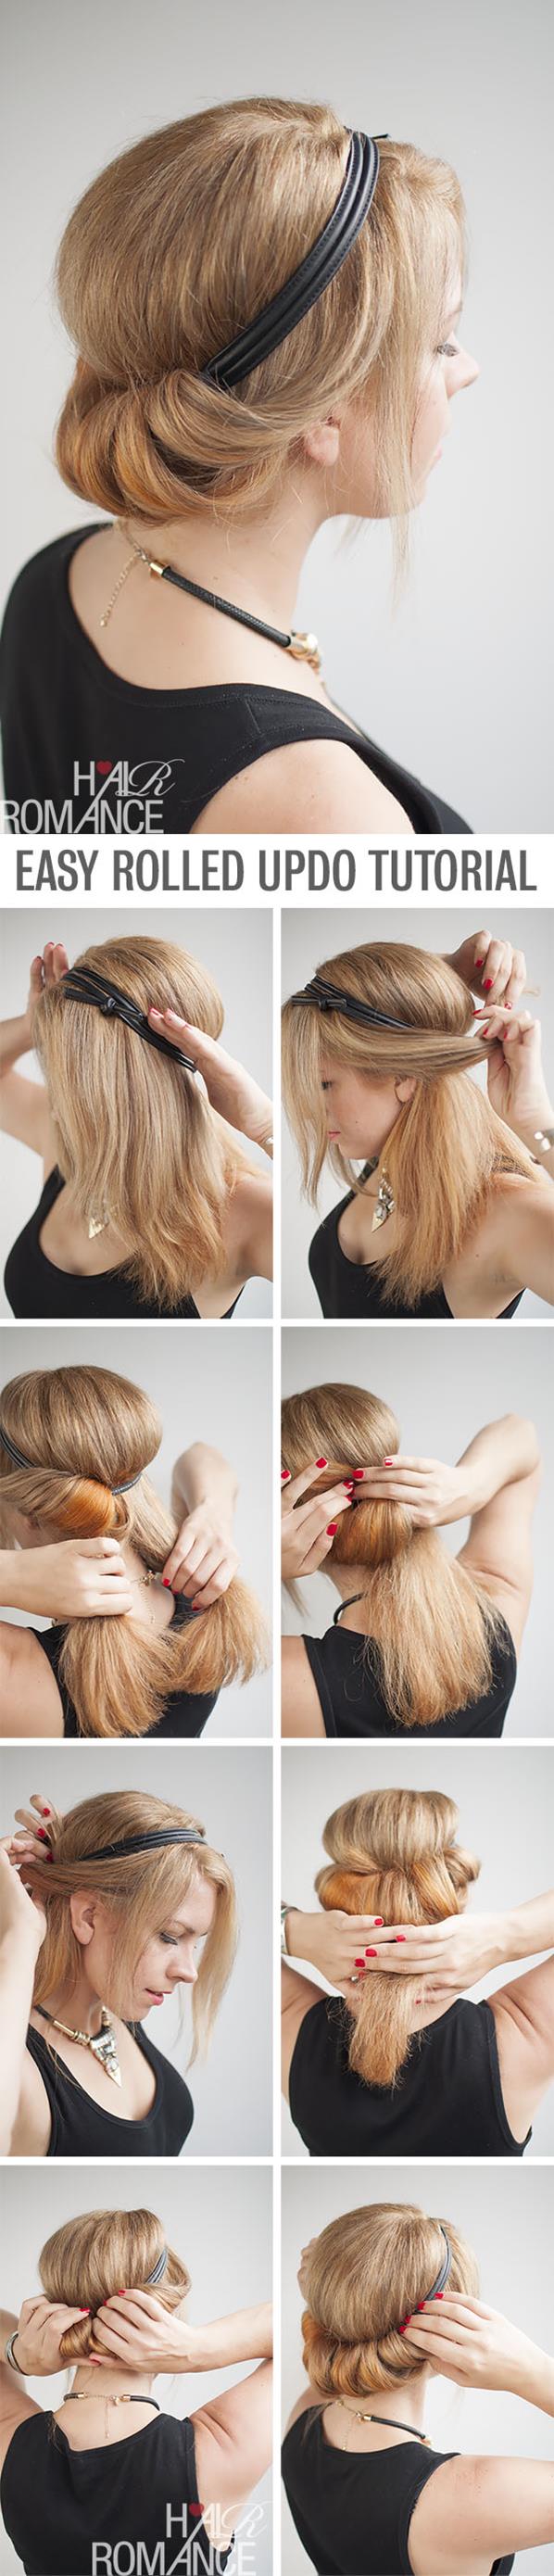 How-to-do-a-rolled-updo-Hairstyle-tutorial-by-Hair-Romance (Copy)